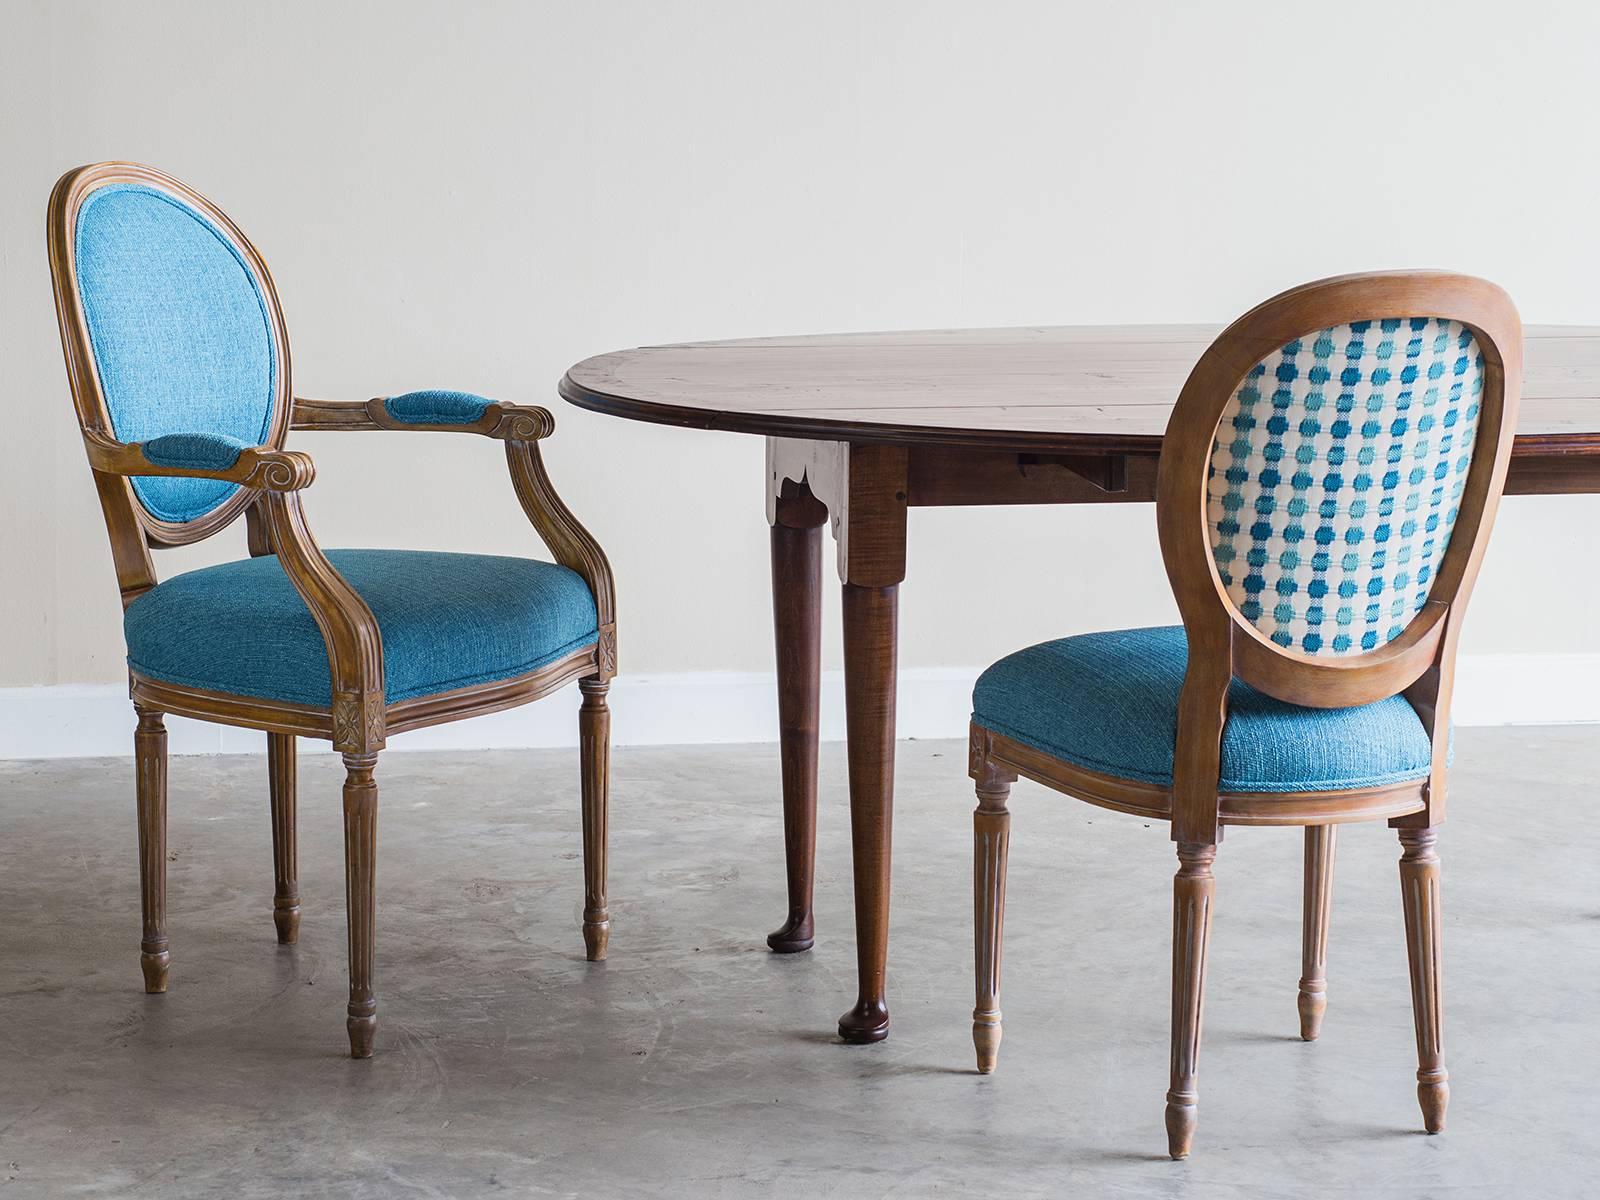 Receive our new selections direct from 1stdibs by email each week. Please click Follow Dealer below and see them first!

A set of oval back Louis XVI style dining chairs with a painted finish from France now custom upholstered in turquoise linen.